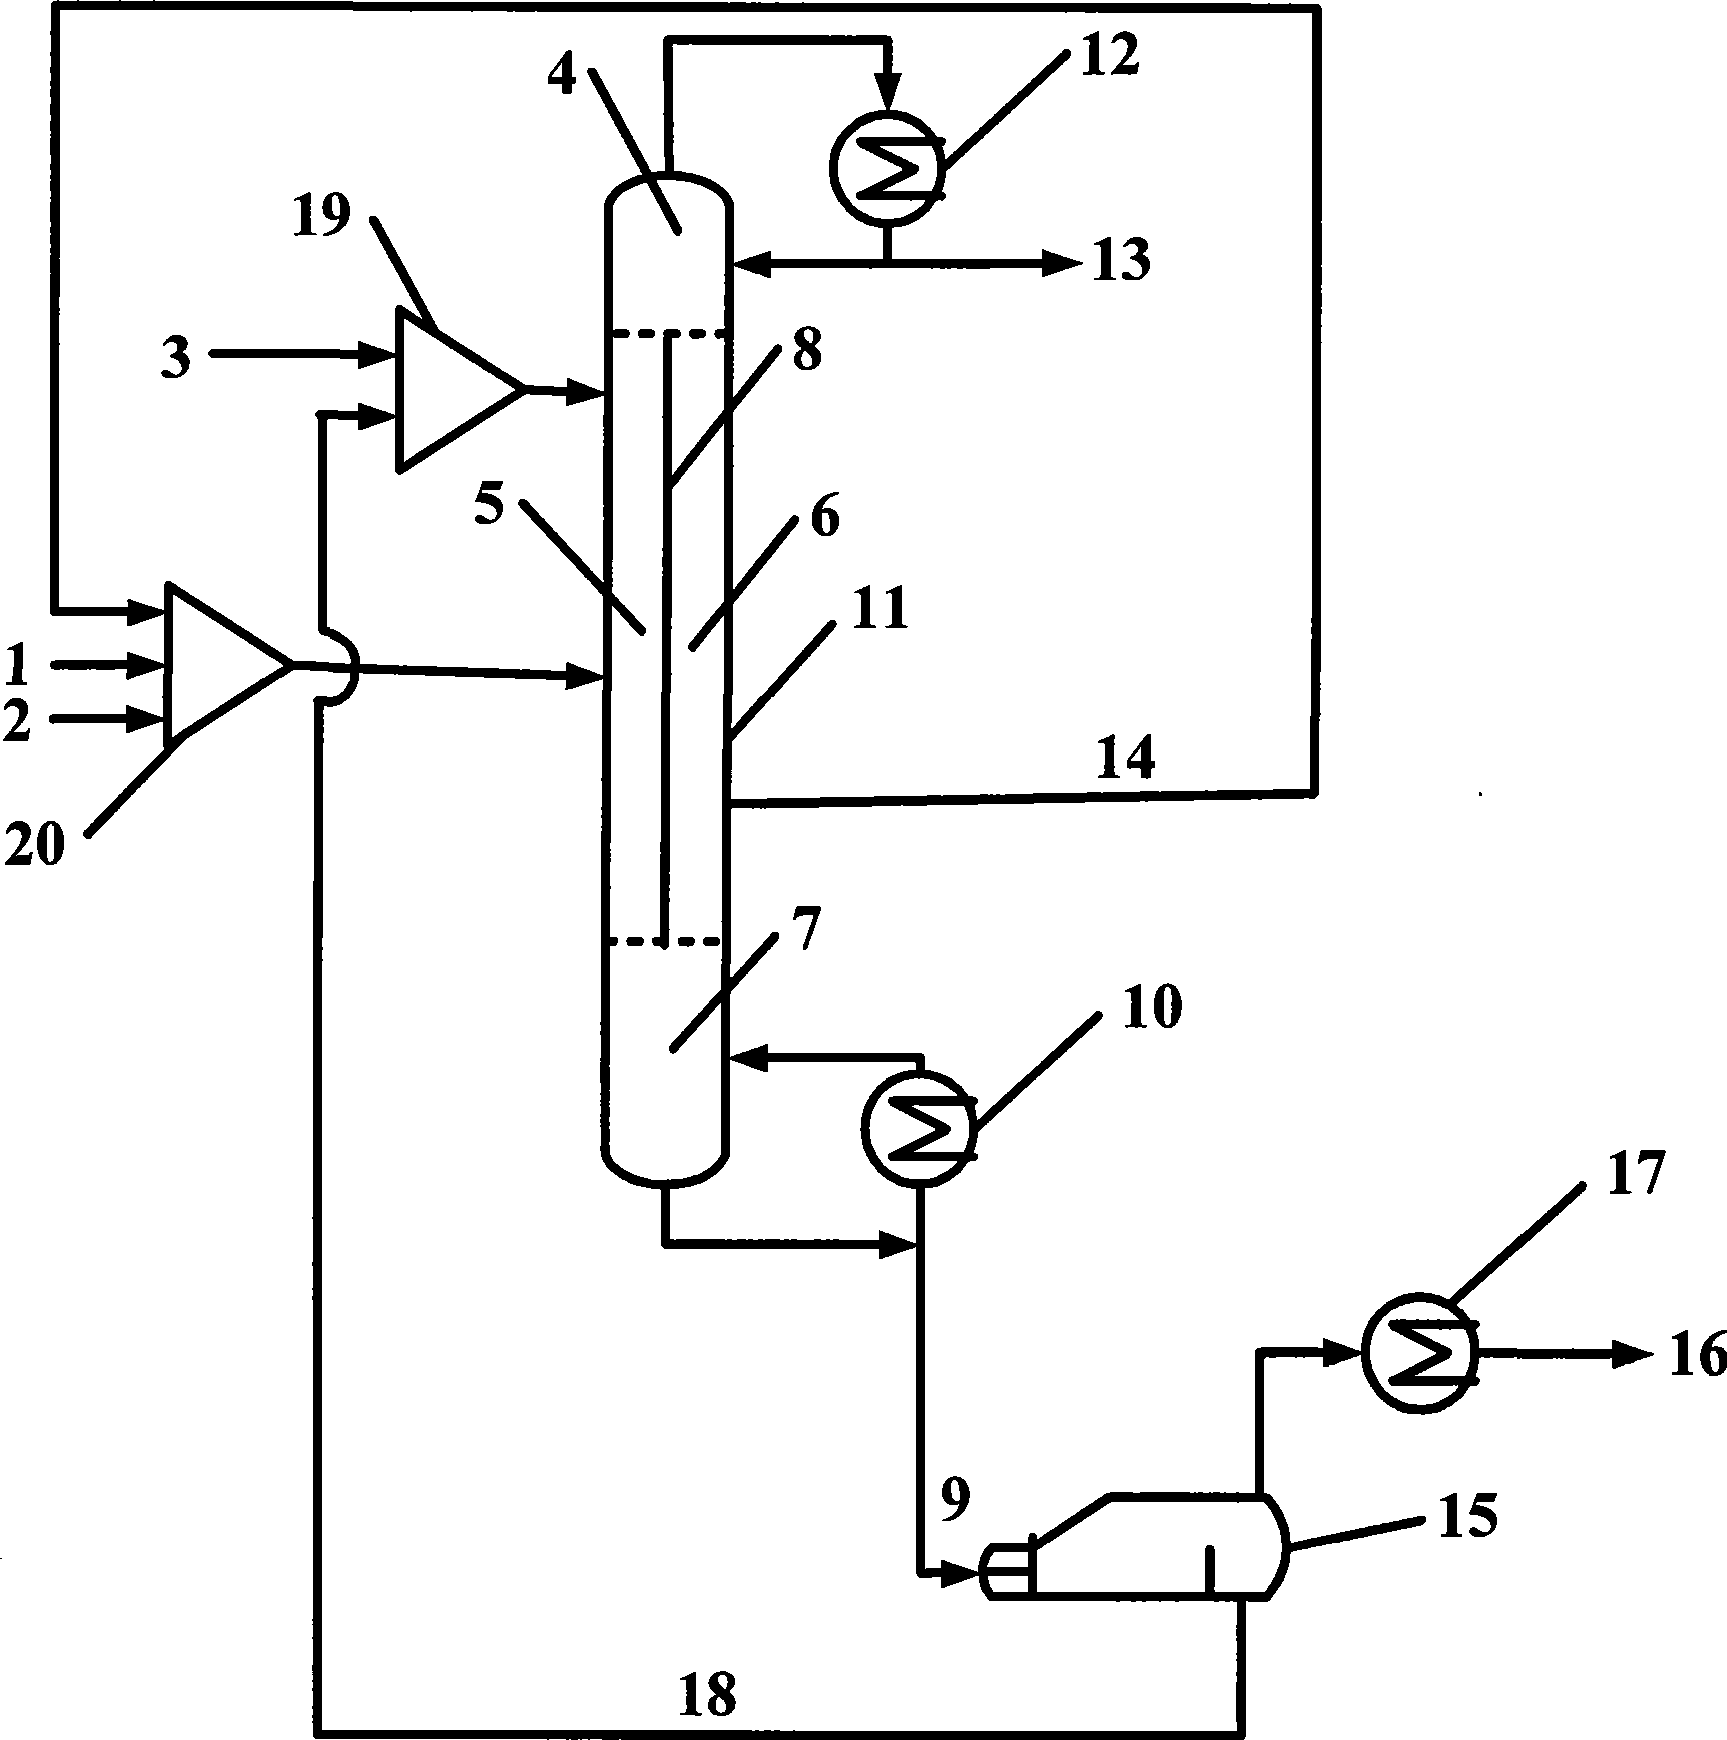 Process and apparatus for preparing diethyl carbonate